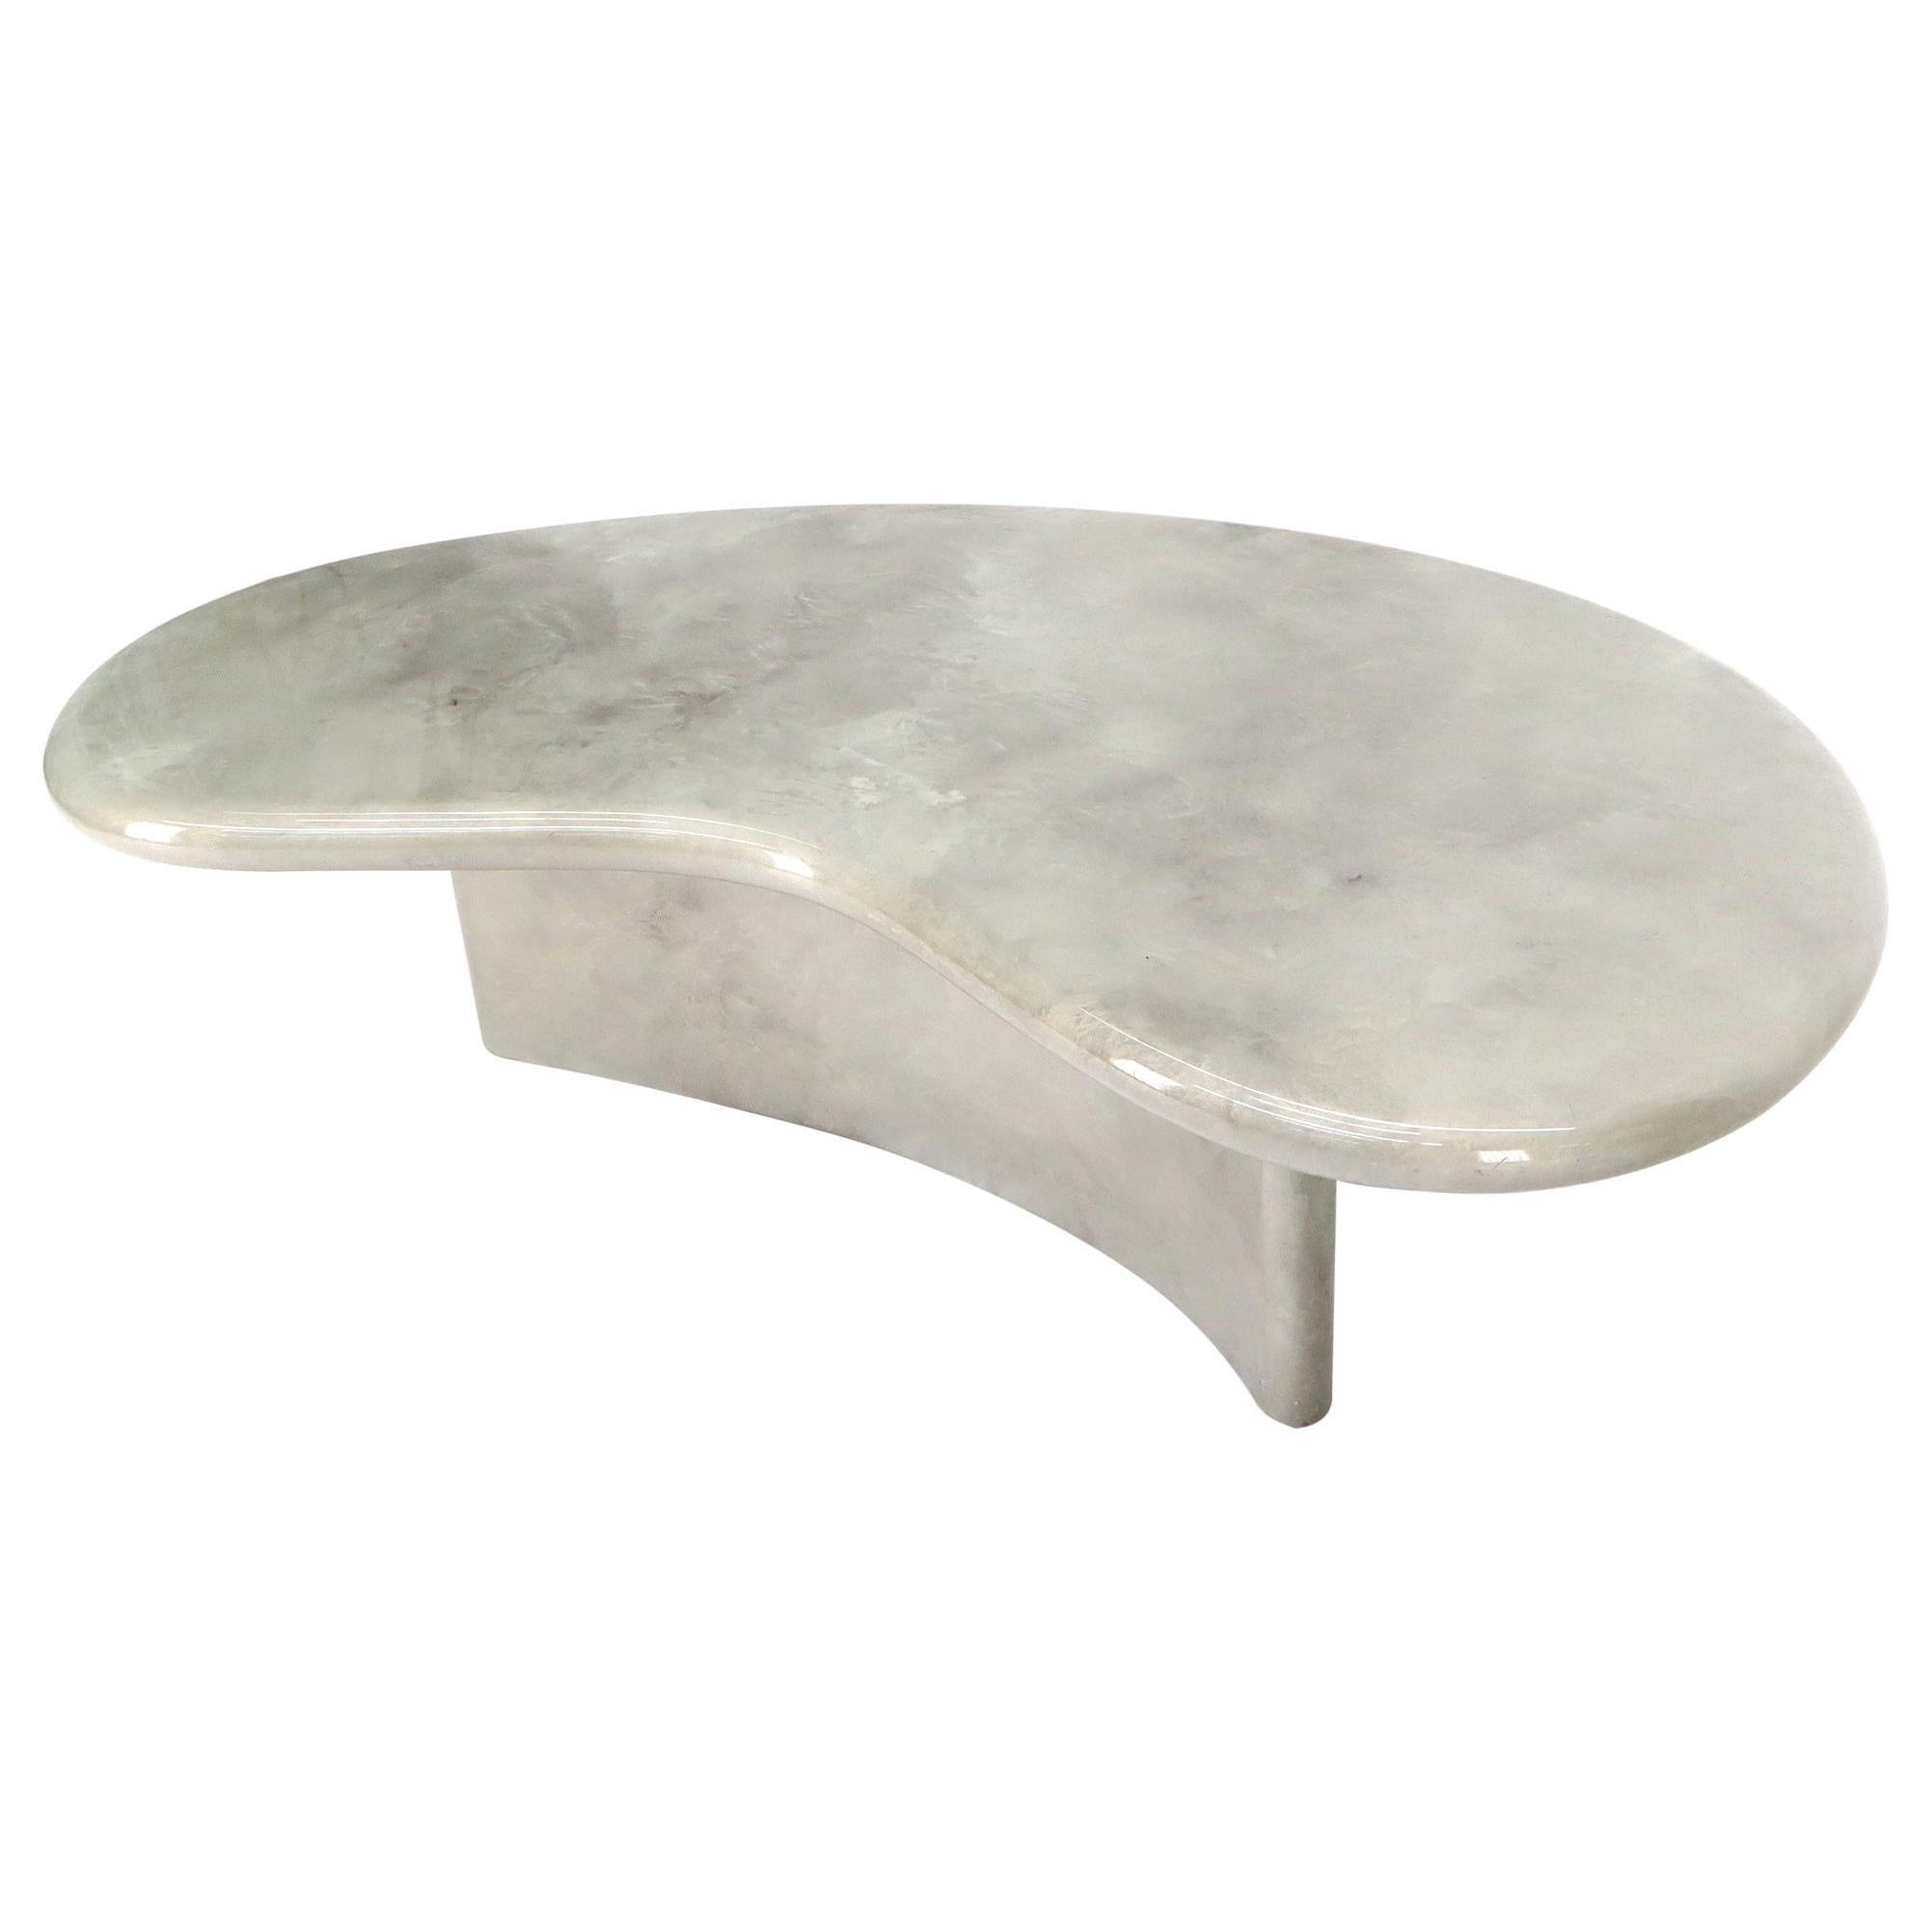 Organic Kidney Shape Faux Marble Finish Coffee Table